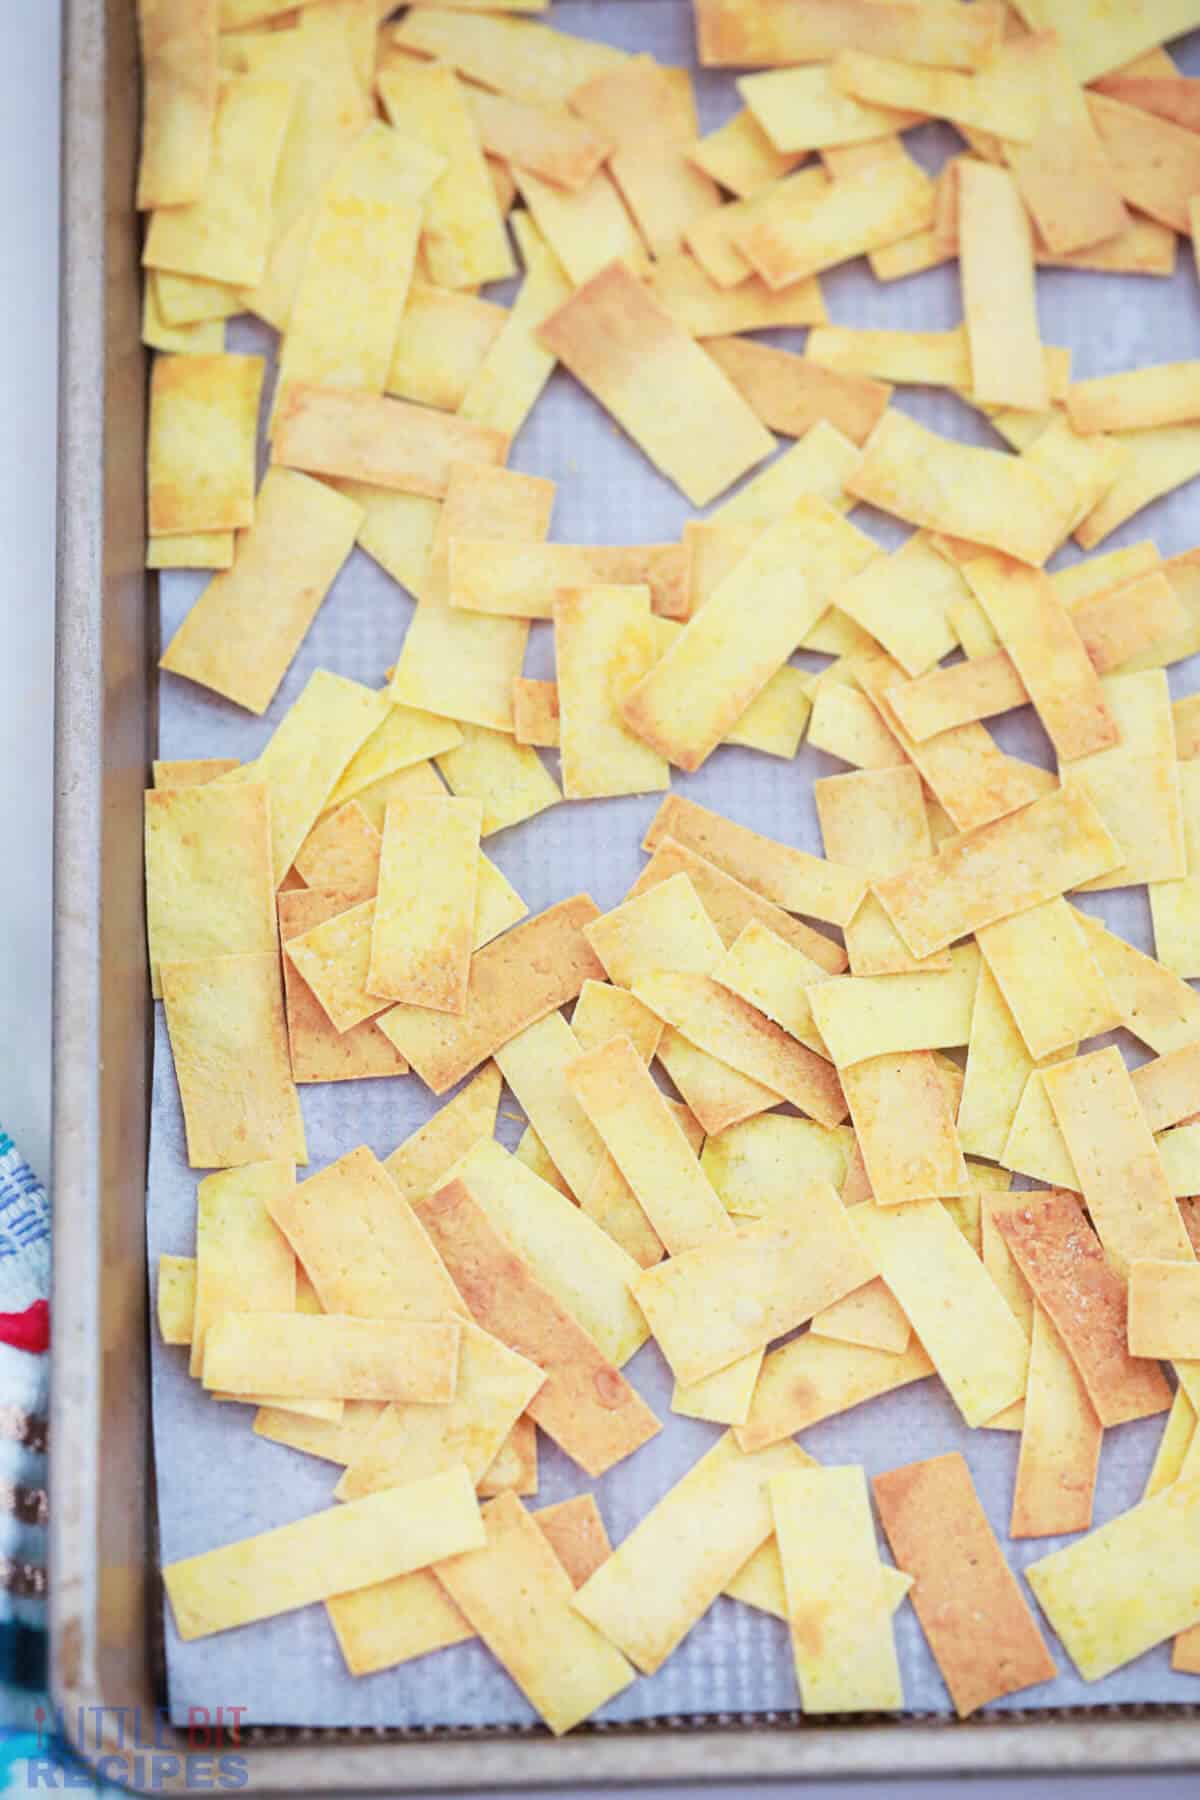 baked tortilla strips on parchment paper lined baking sheet.